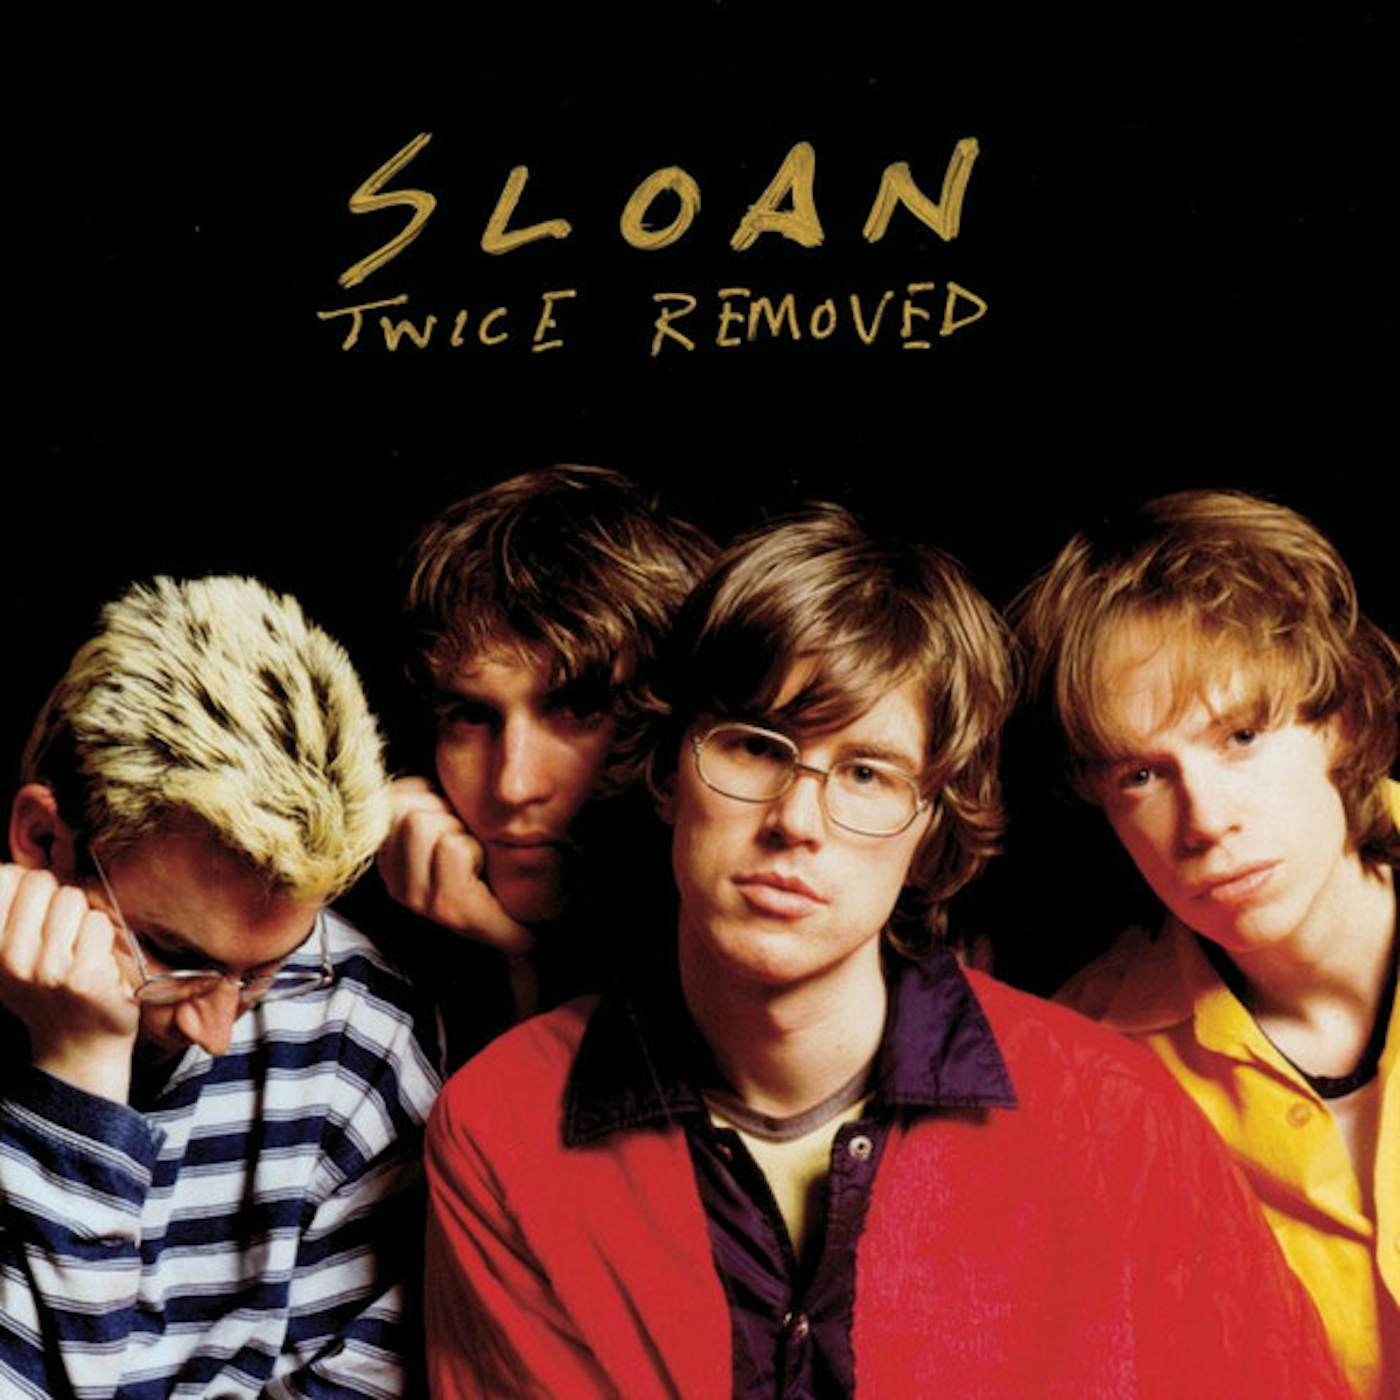 Sloan Twice Removed [Reissue] vinyl record